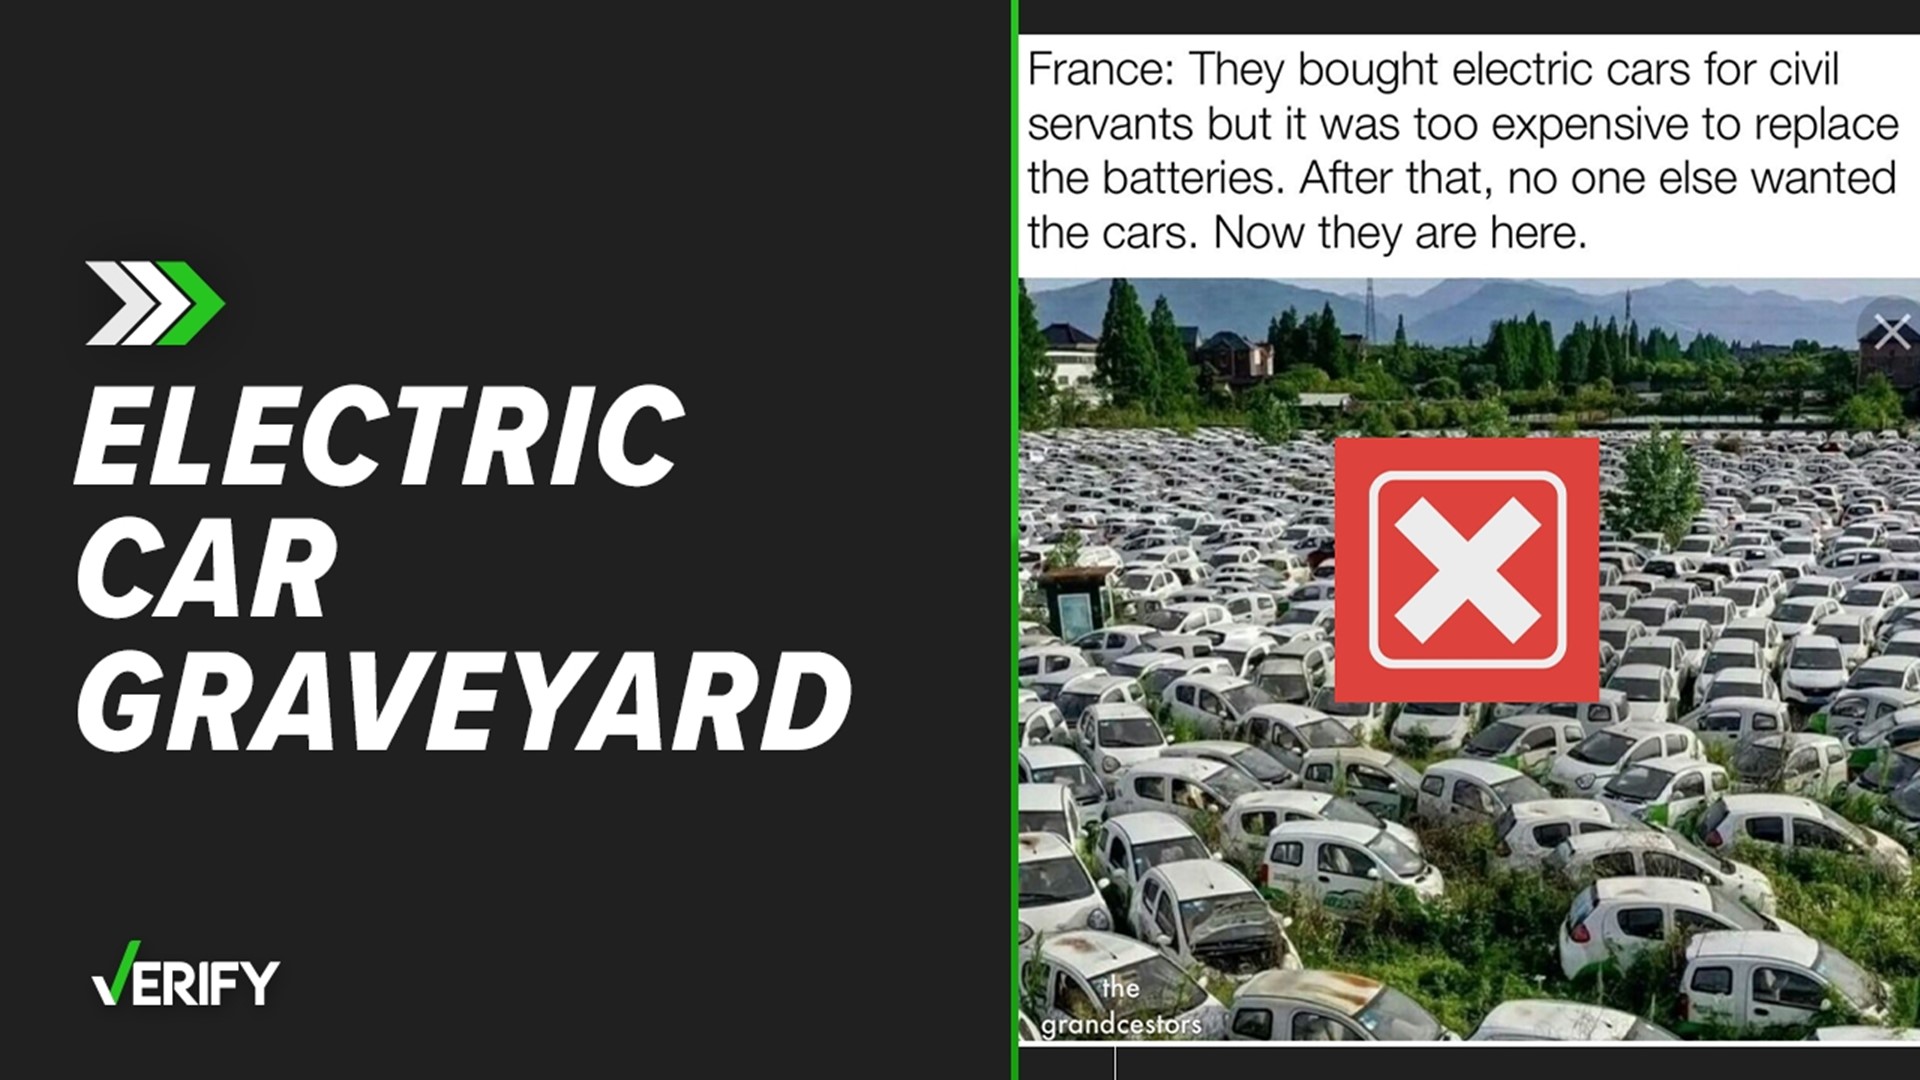 Paris electric car graveyard posts that claim to show abandoned vehicles in France have been shared on social media for years. Here are two that we know are false.